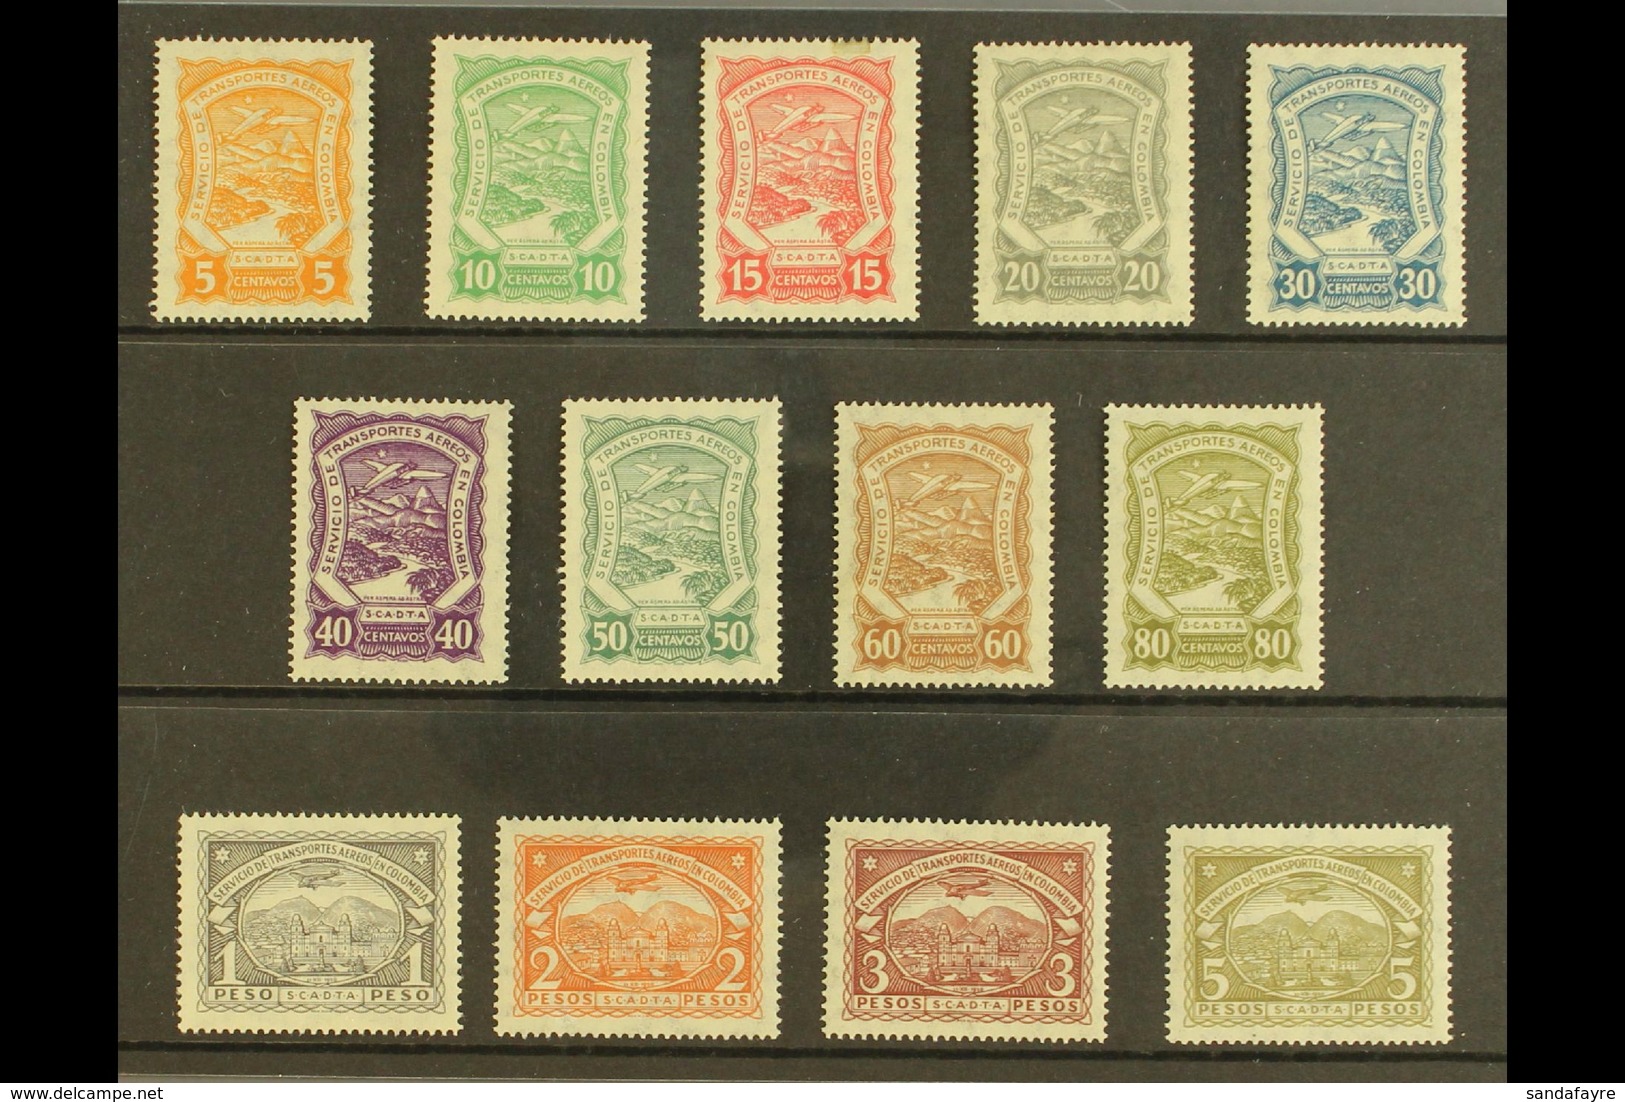 PRIVATE AIRS - SCADTA 1923-28 Complete Set, Scott C38/50 (SG 37/49, Michel 29/39 & 43/44), Never Hinged Mint, The 15c Wi - Colombia